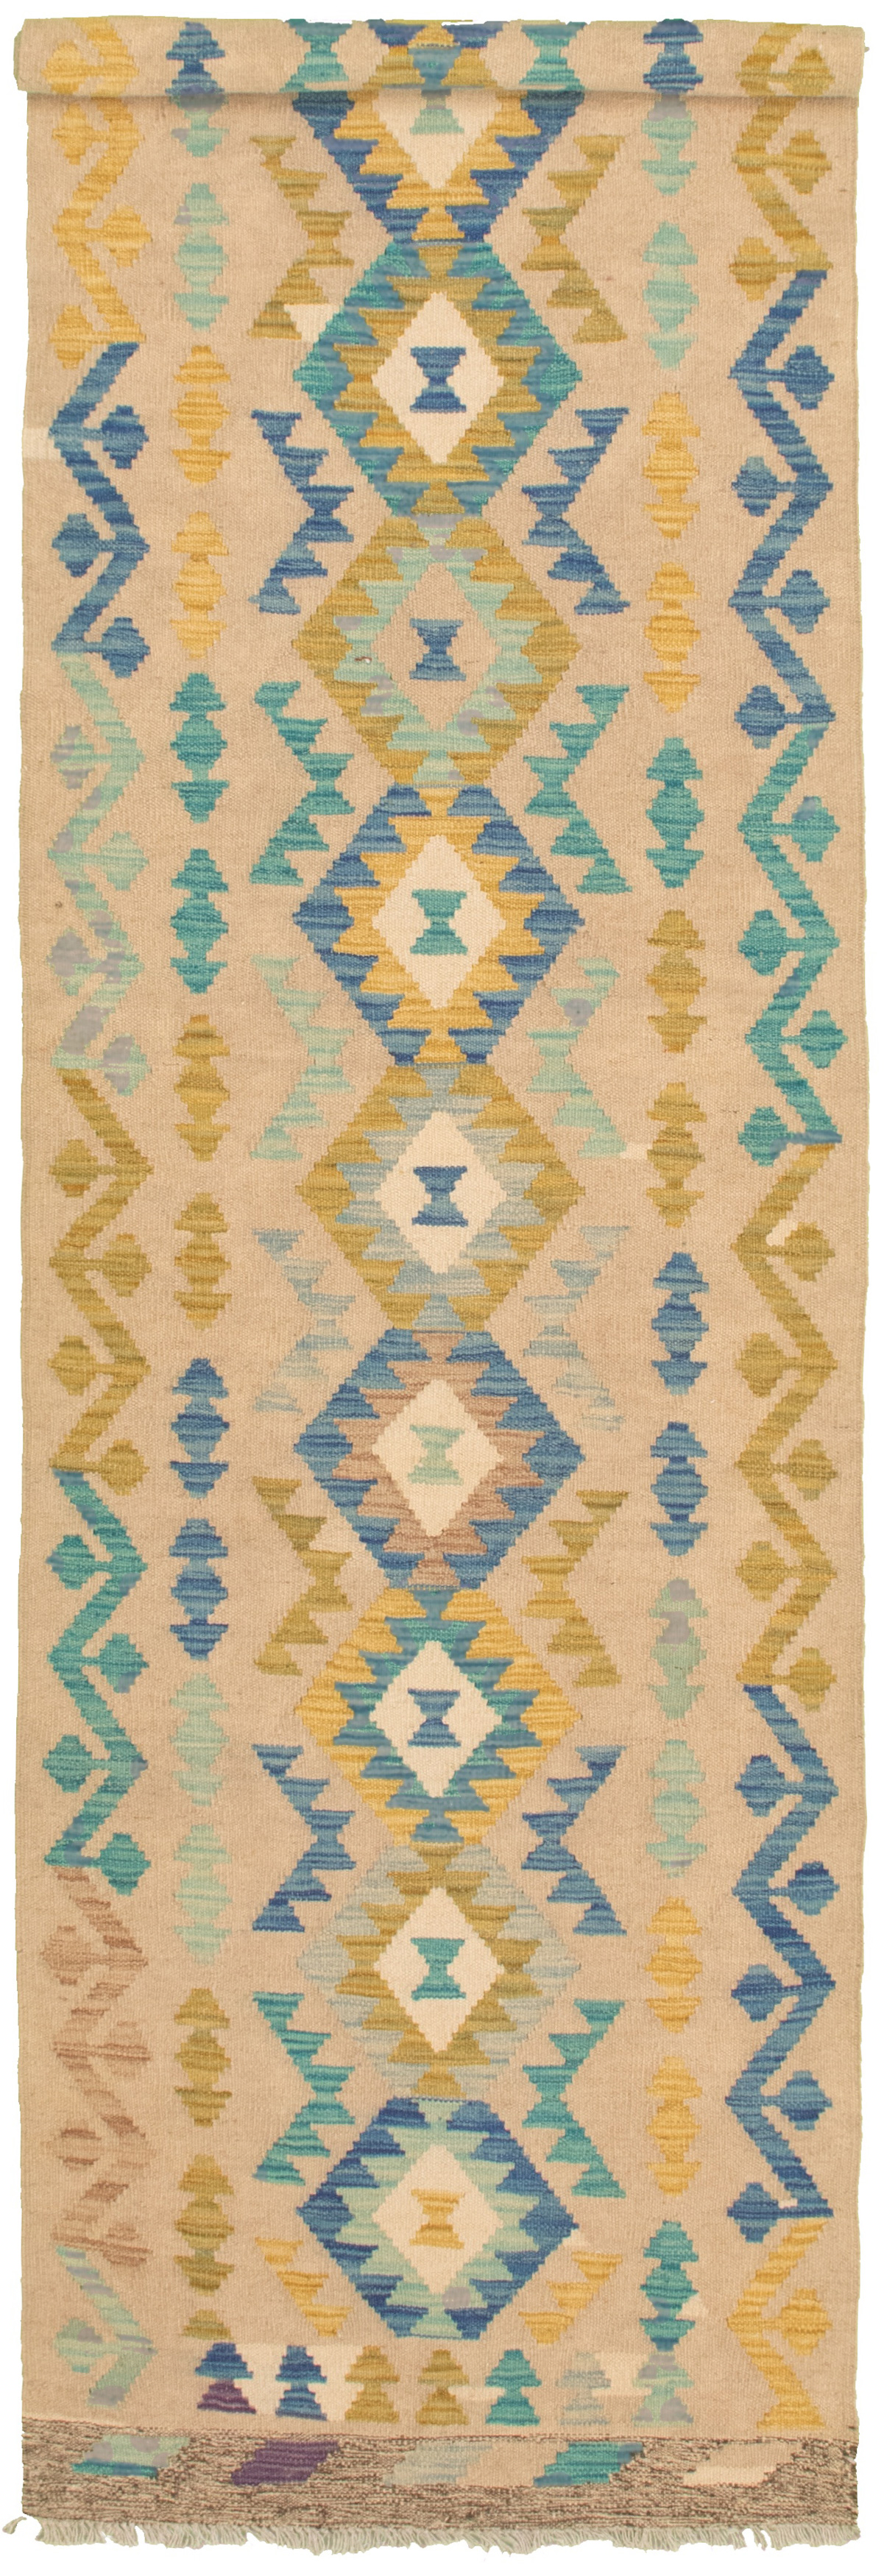 Hand woven Bold and Colorful  Ivory Wool Kilim 2'7" x 9'10" Size: 2'7" x 9'10"  